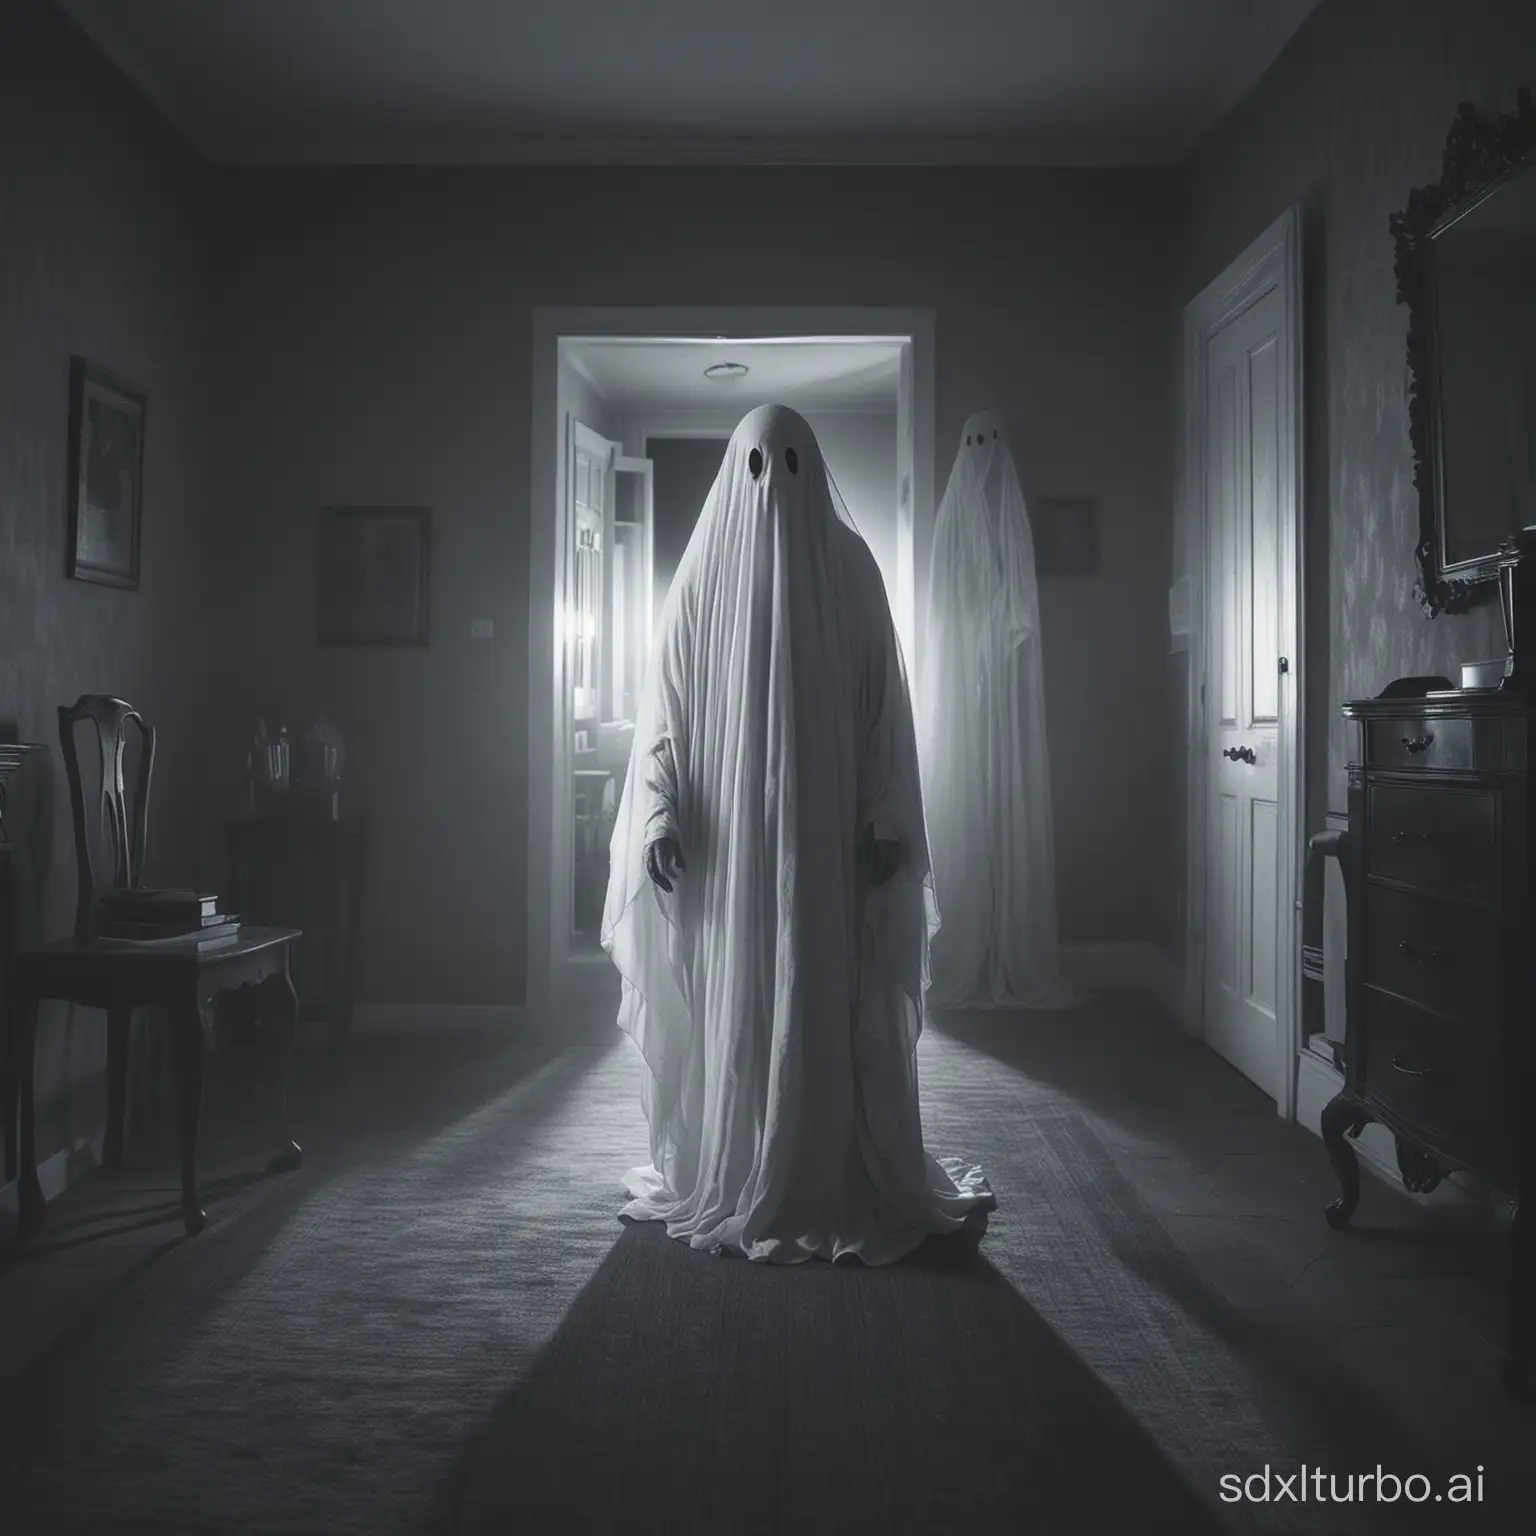 A ghost roaming in the room at midnight